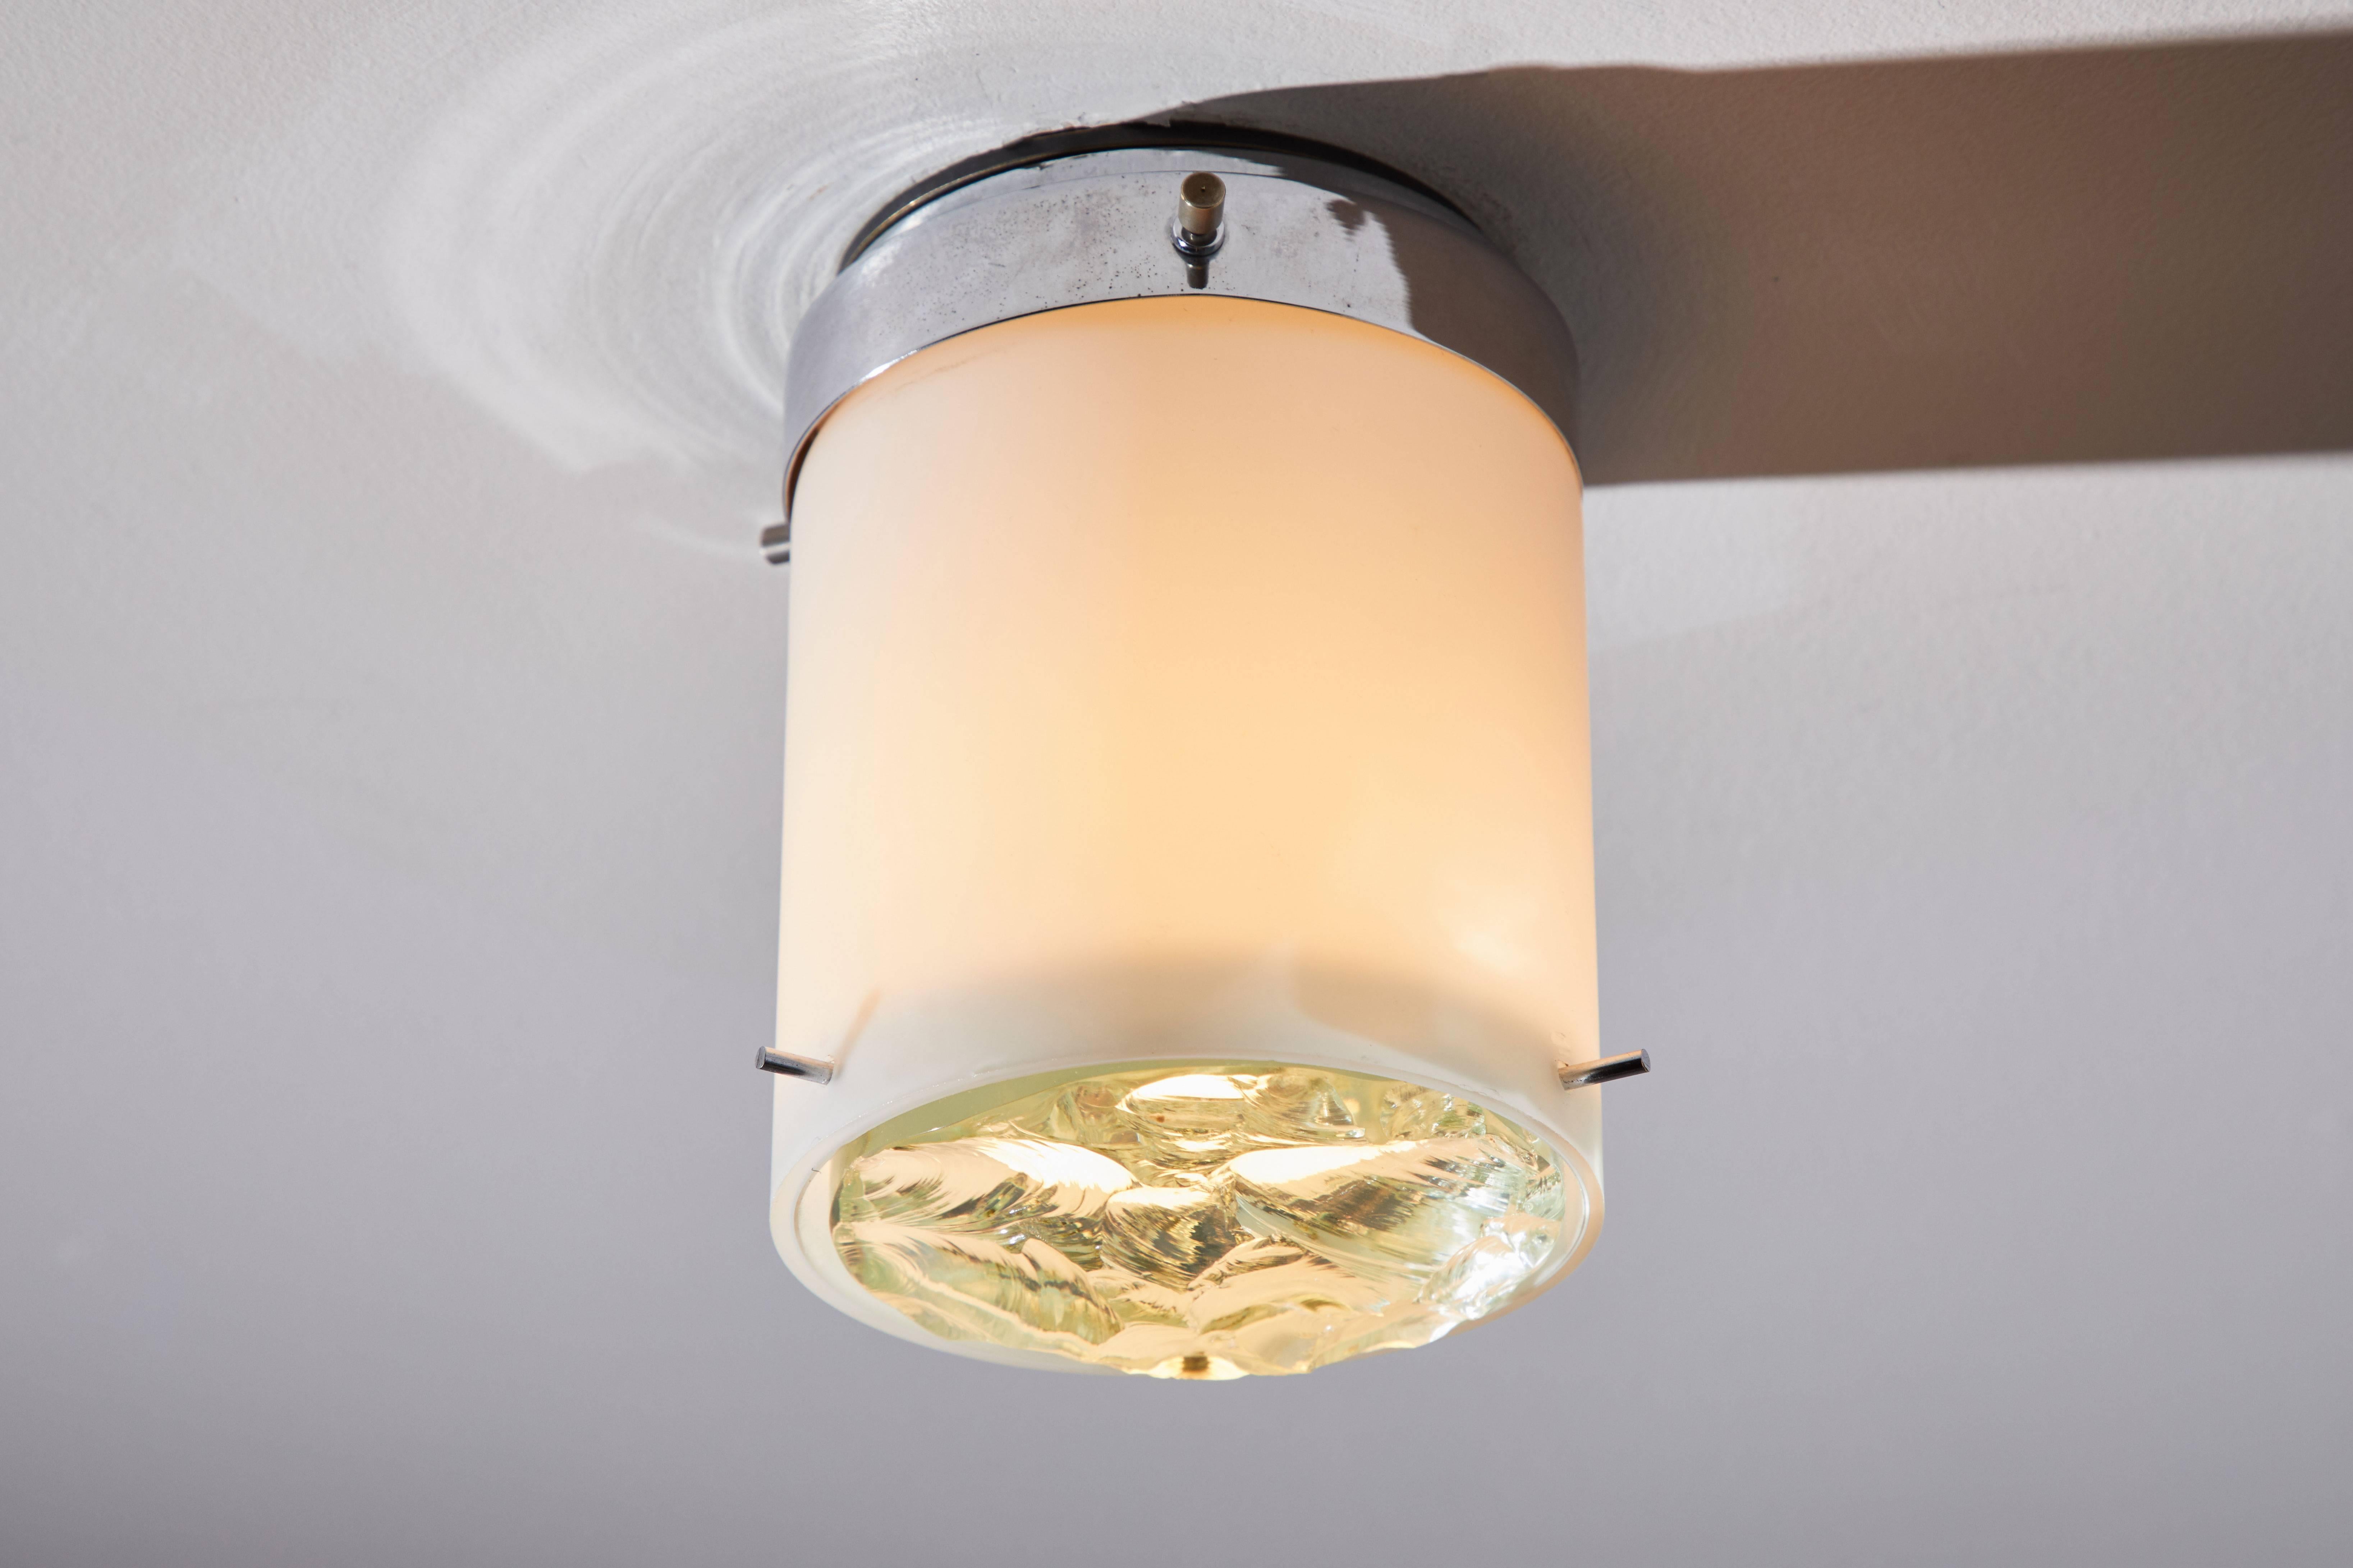 Model 2494 wall or ceiling lights by Max Ingrand for Fontana Arte designed and manufactured in Italy, late 1960s. Chromed brass, opal glass, chiselled crystal. Wired for US junction boxes. Each light takes one E14 75w bulb. Measurements vary